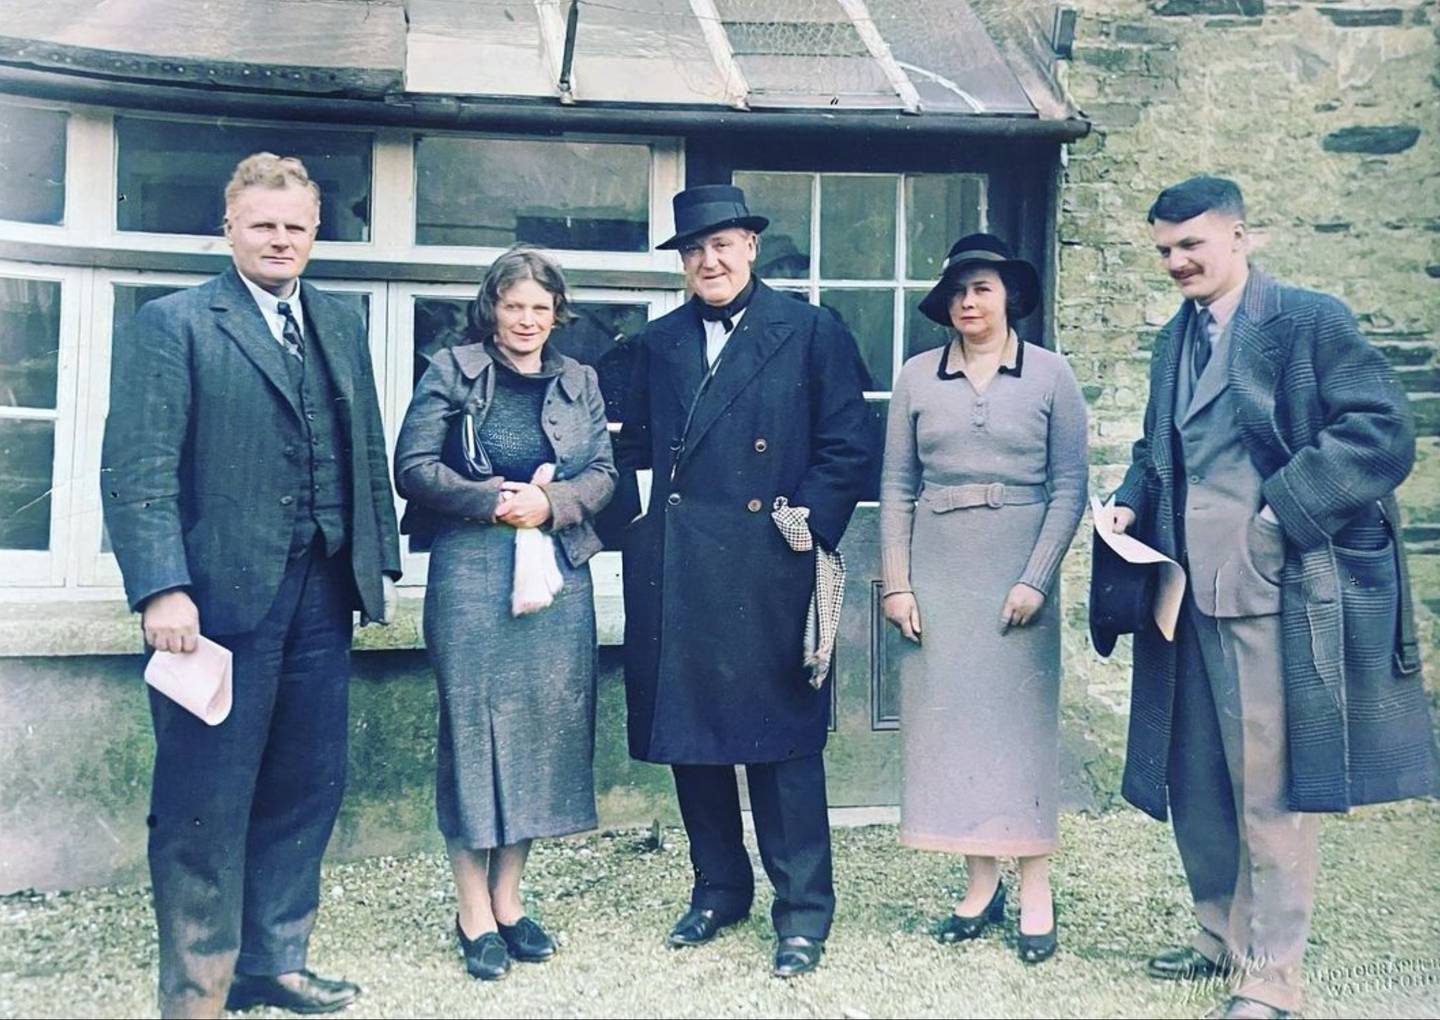 Paul Henry (centre) at the official opening of the Newtown School Art Exhibition, 1937, with Arnold Marsh, Hilda Roberts, Joan Chambers and Robert Burke.  Photograph: Supplied by Lilliput Press